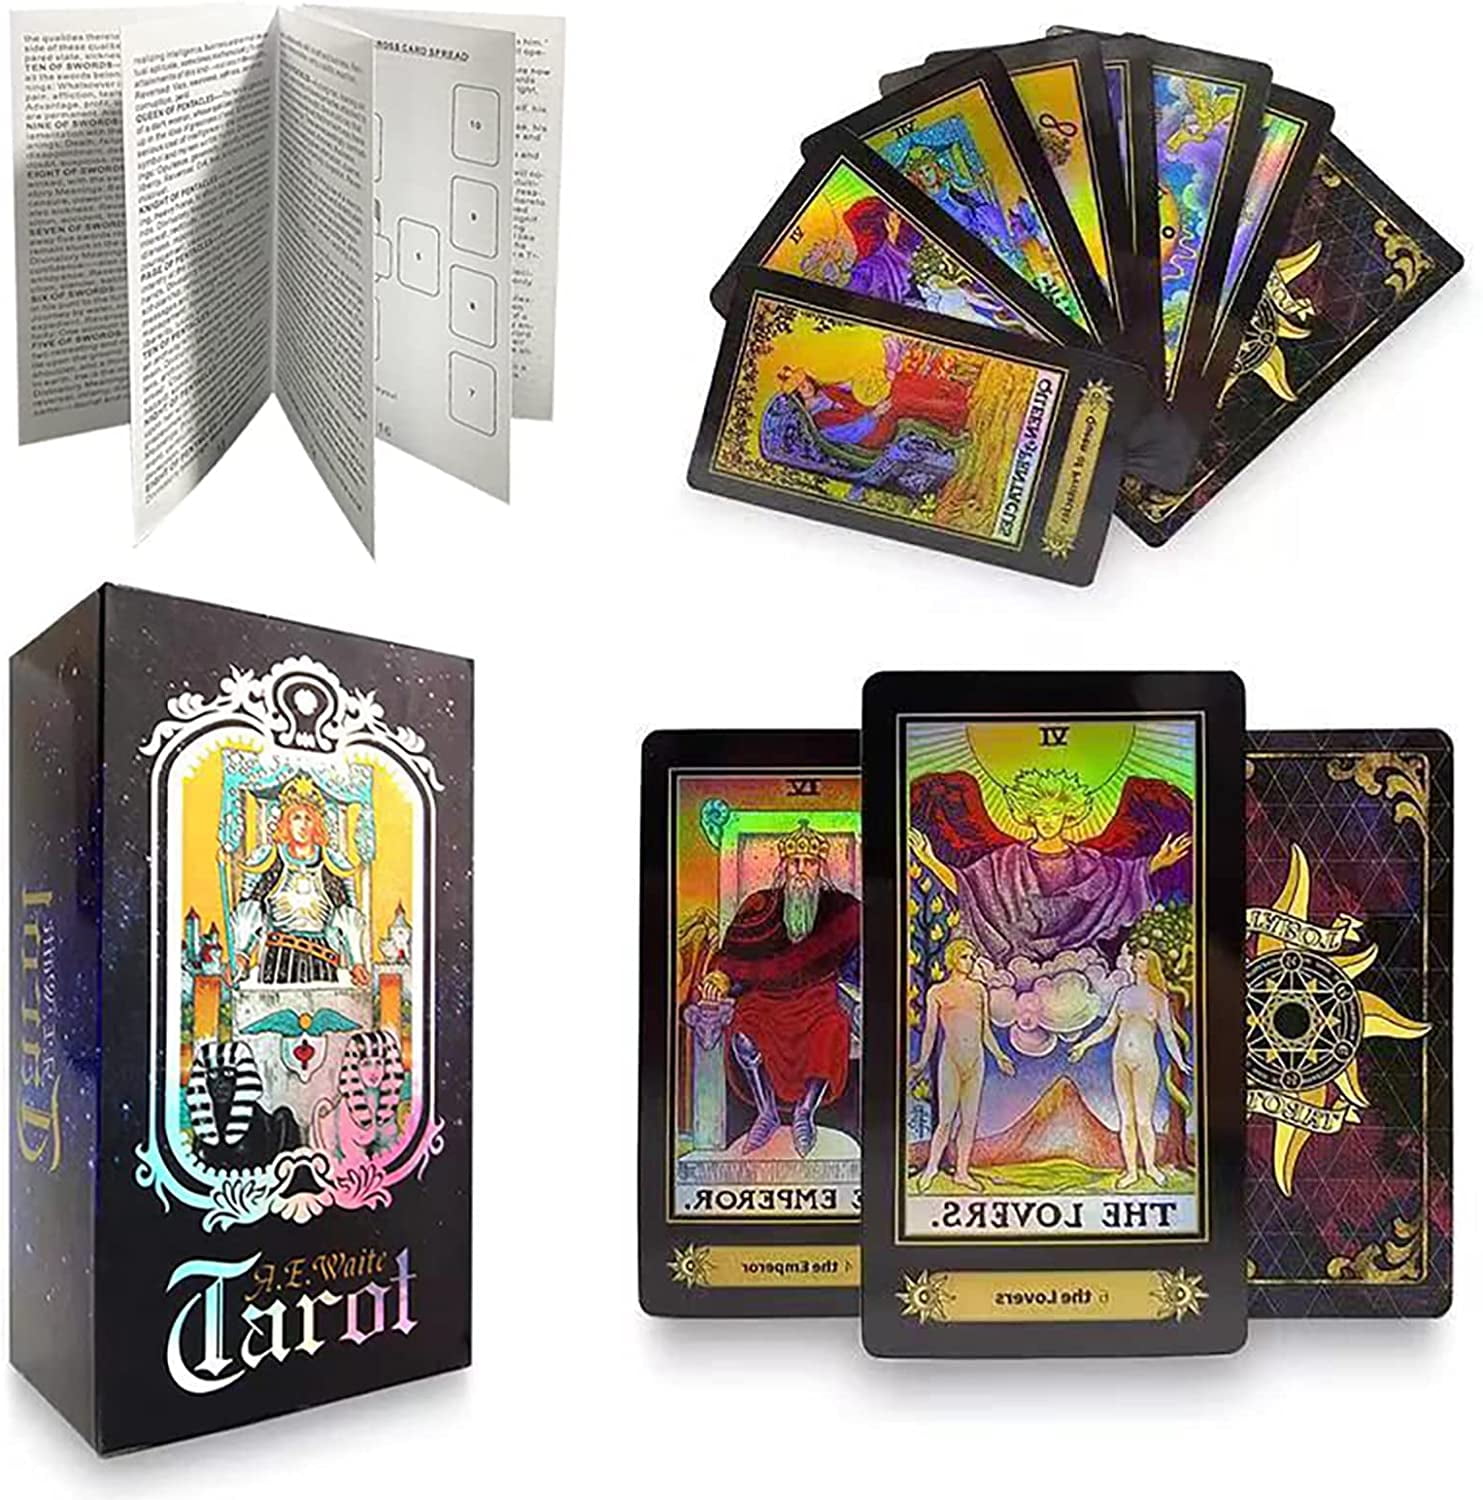 Retrok 78pcs Tarot Cards Tarot Deck with Guidebook book ,Future Game Play Cards for Beginners Player Holographic Artwork for Divination - Walmart.com